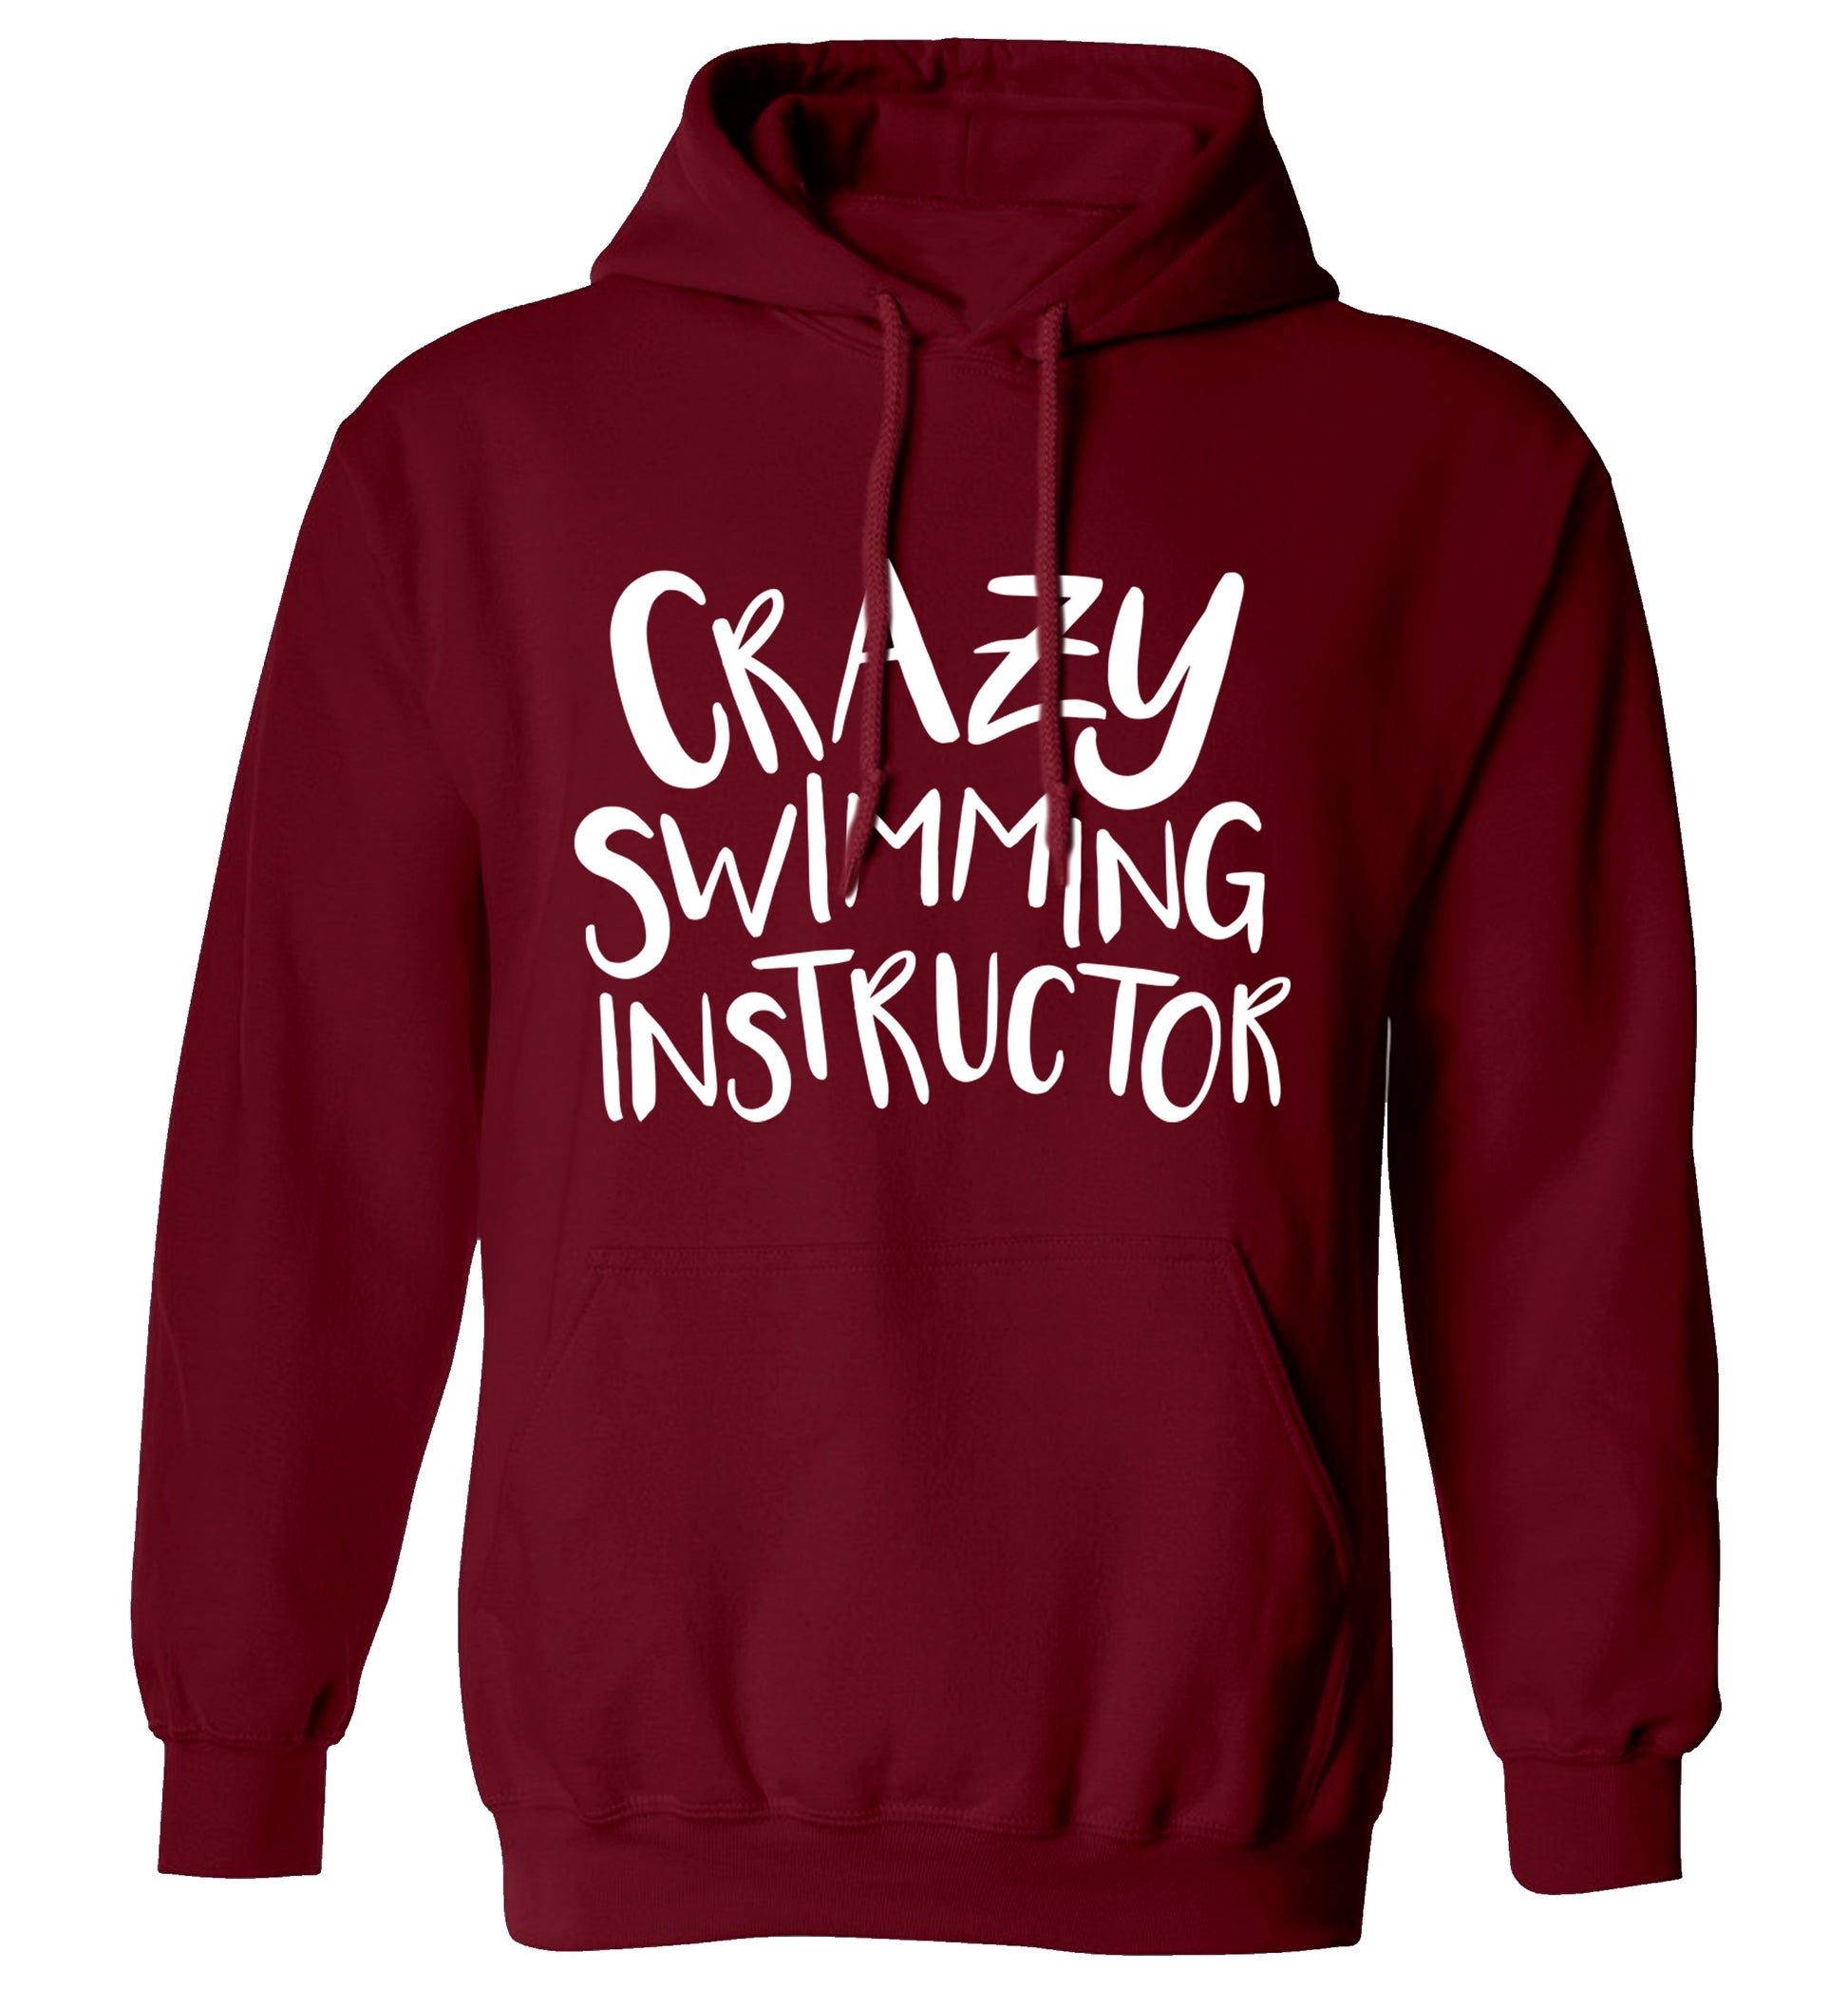 Crazy swimming instructor adults unisex maroon hoodie 2XL